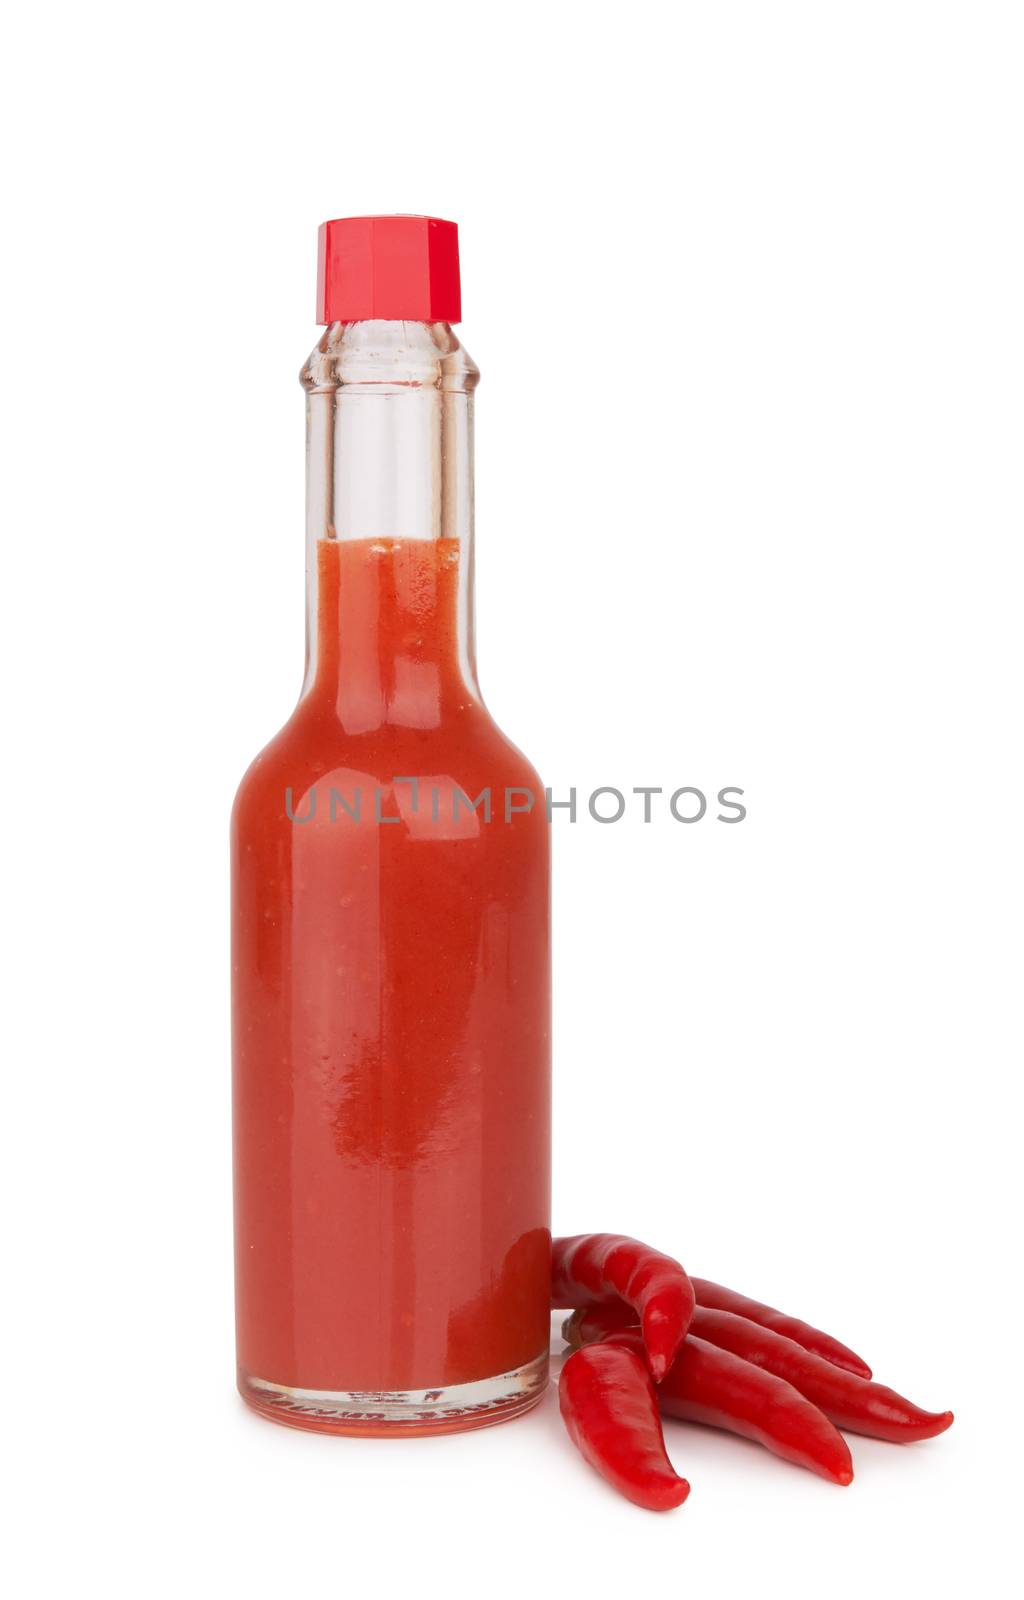 A bottle of hot sauce by pioneer111